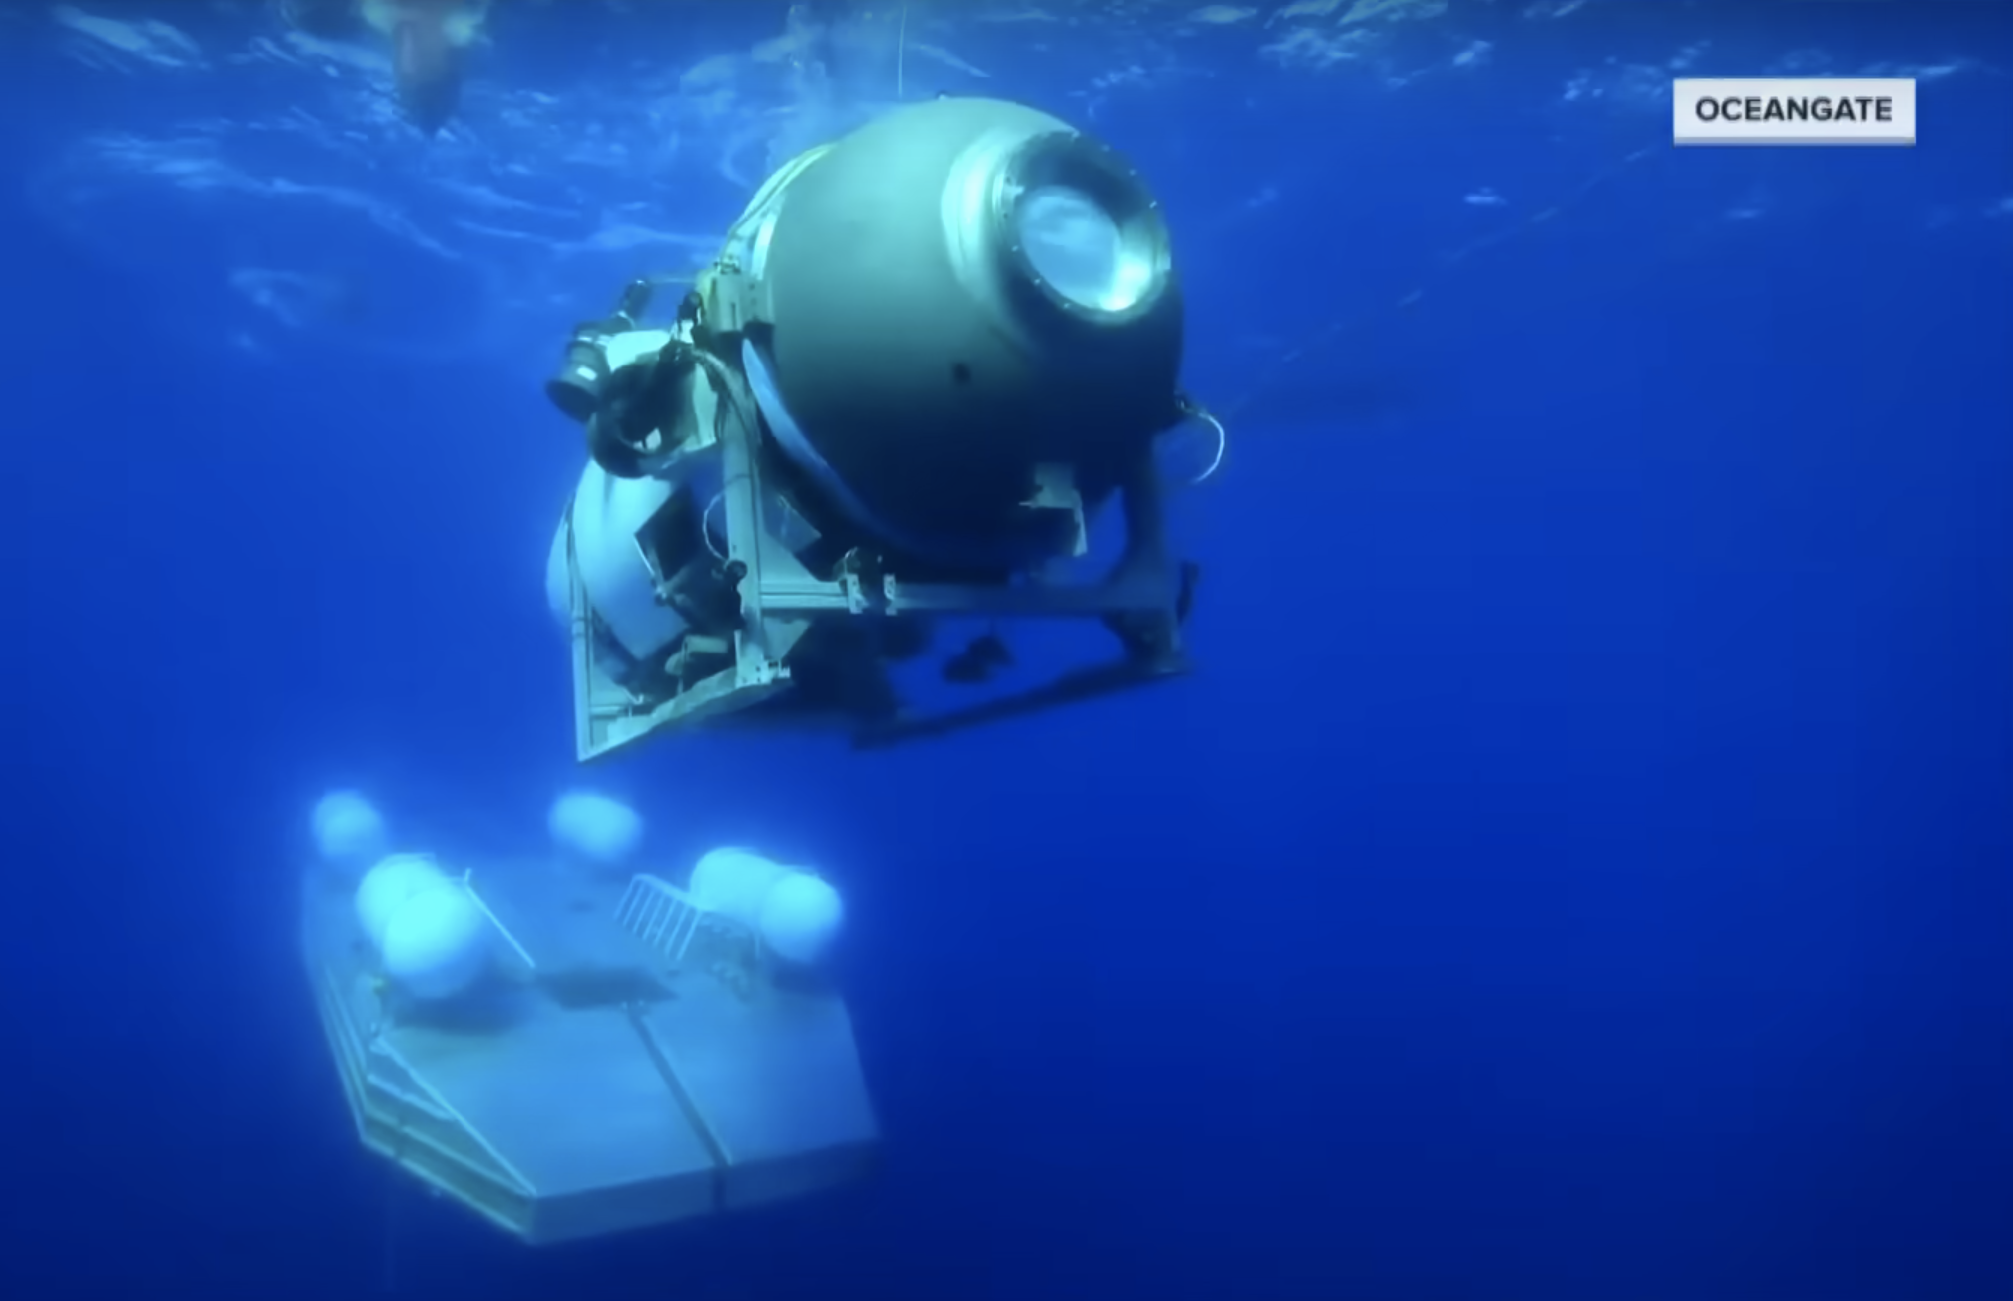 The submersible above its takeoff platform